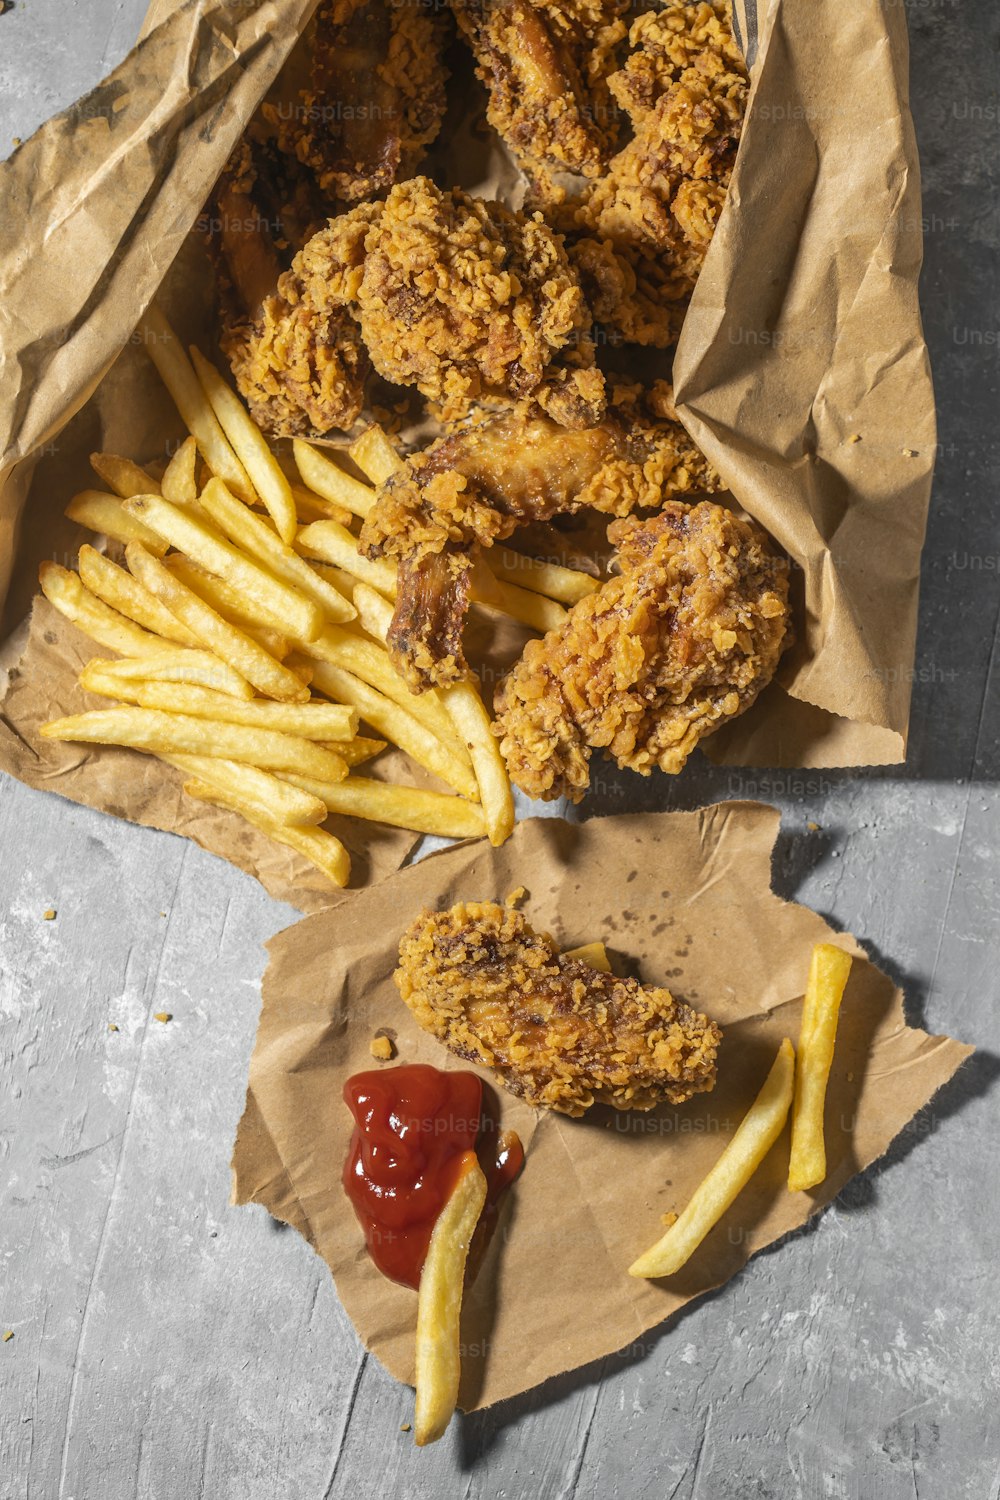 fried chicken and french fries with ketchup and ketchup